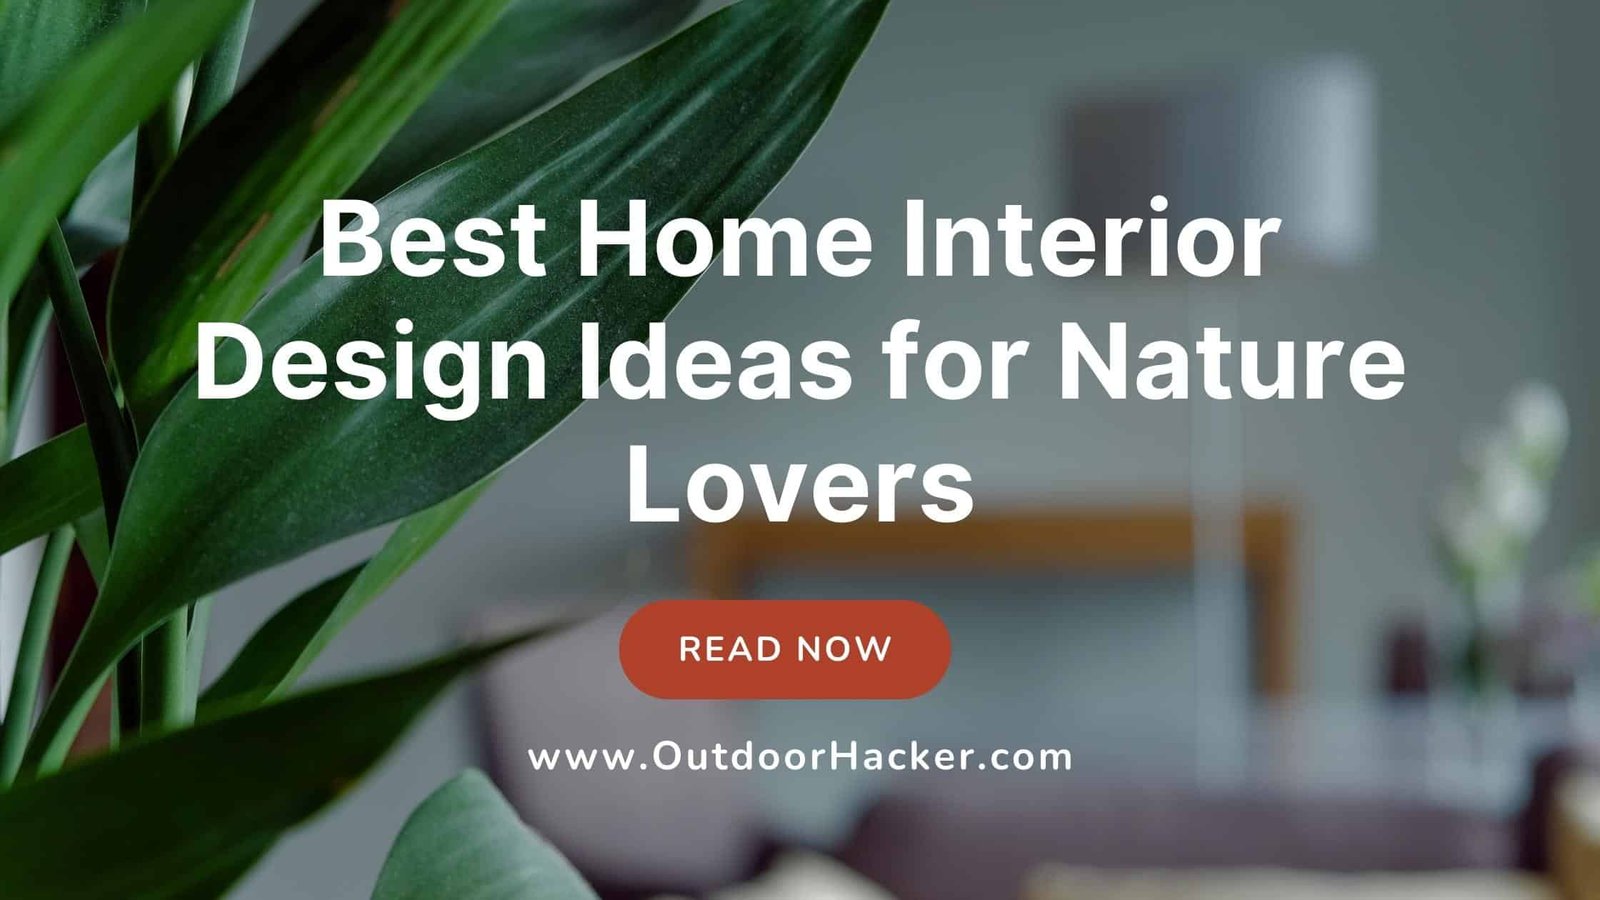 Best Home Interior Design Ideas for Nature Lovers